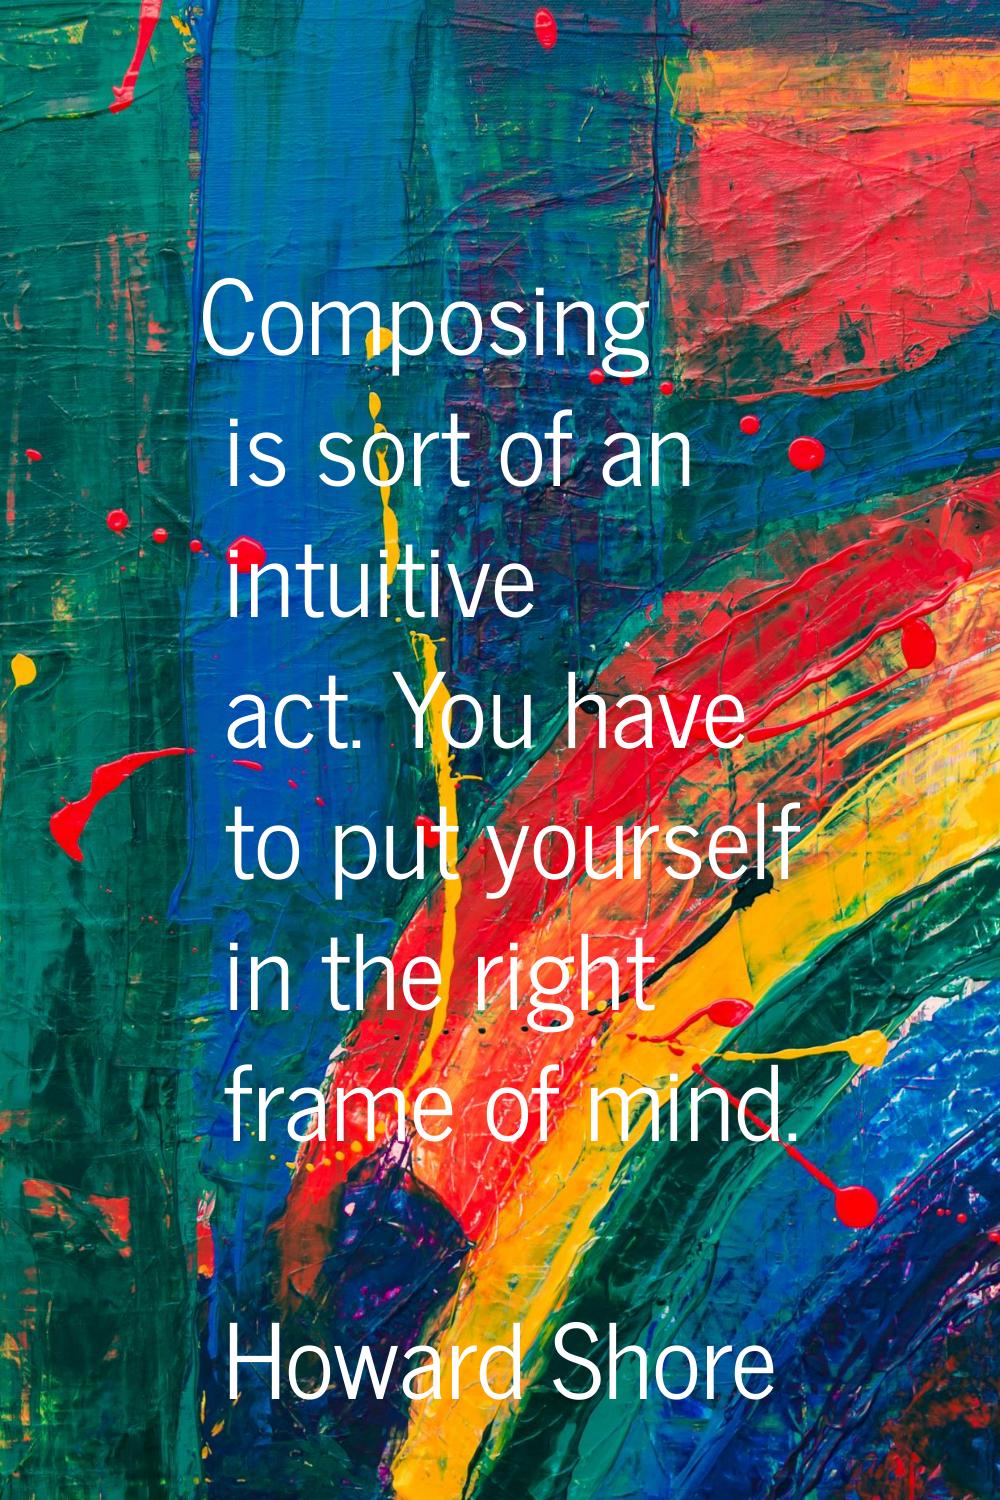 Composing is sort of an intuitive act. You have to put yourself in the right frame of mind.